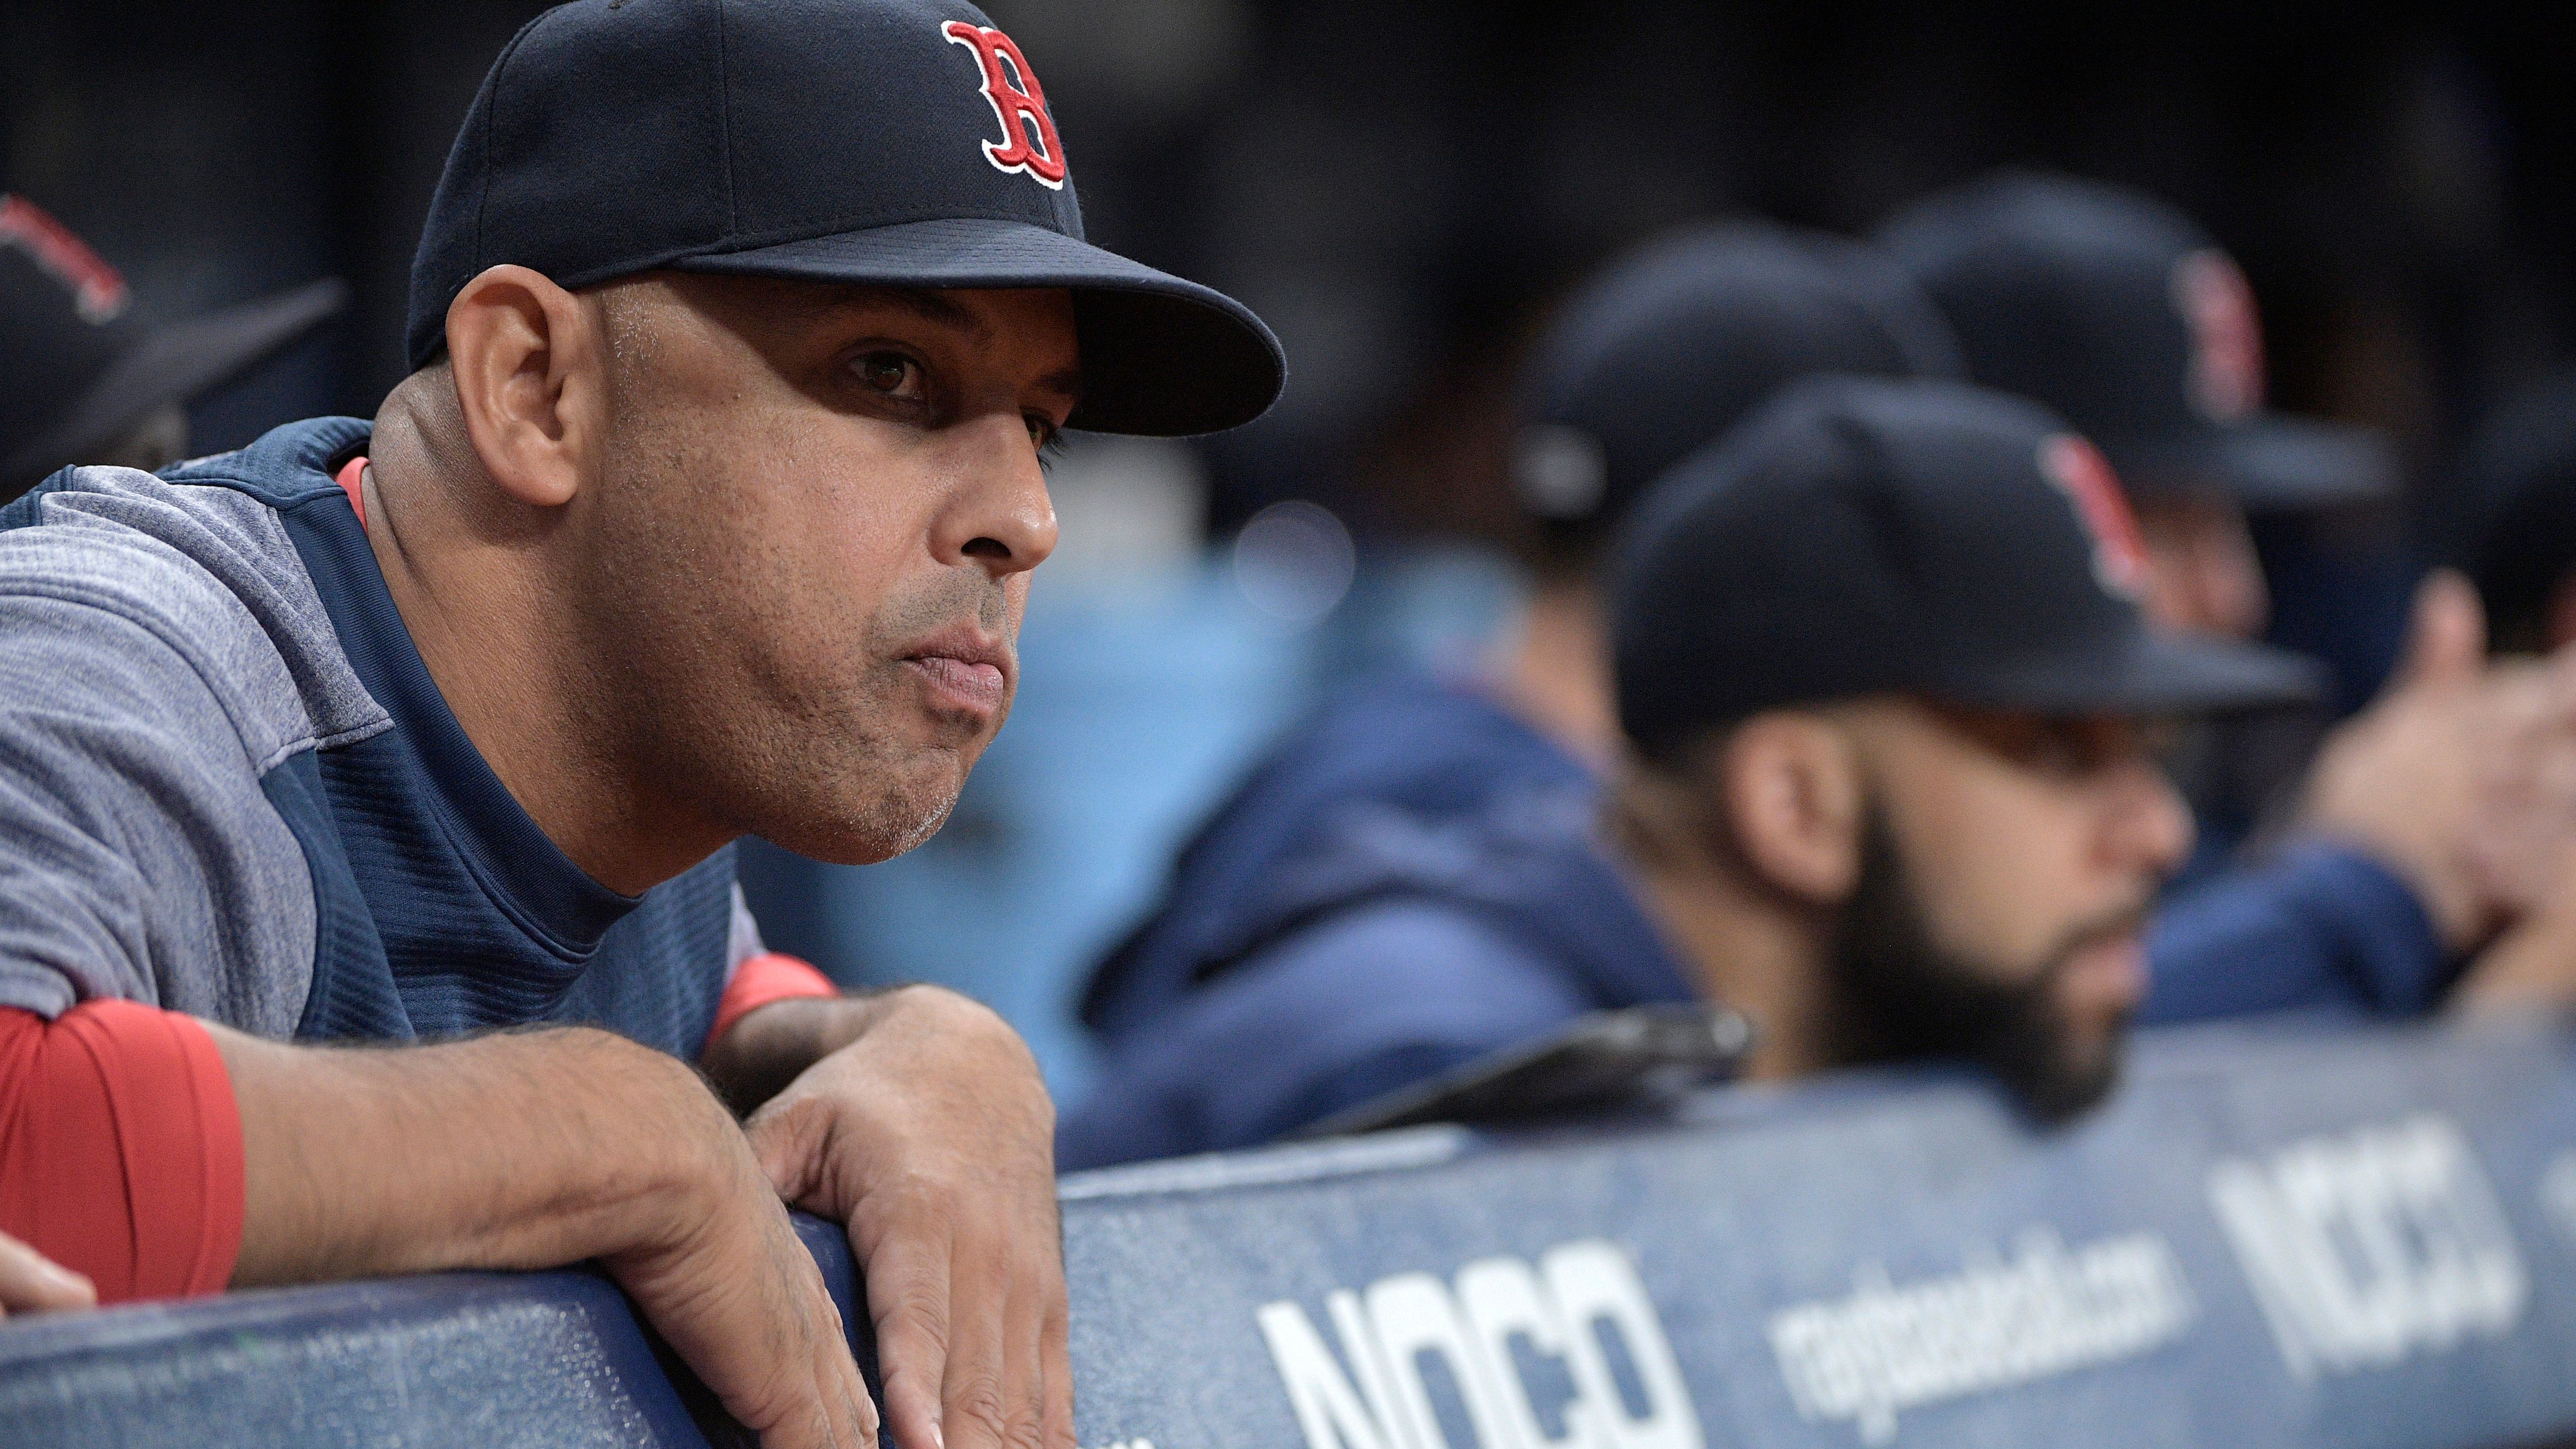 Boston Red Sox fire manager Alex Cora amid sign-stealing investigation